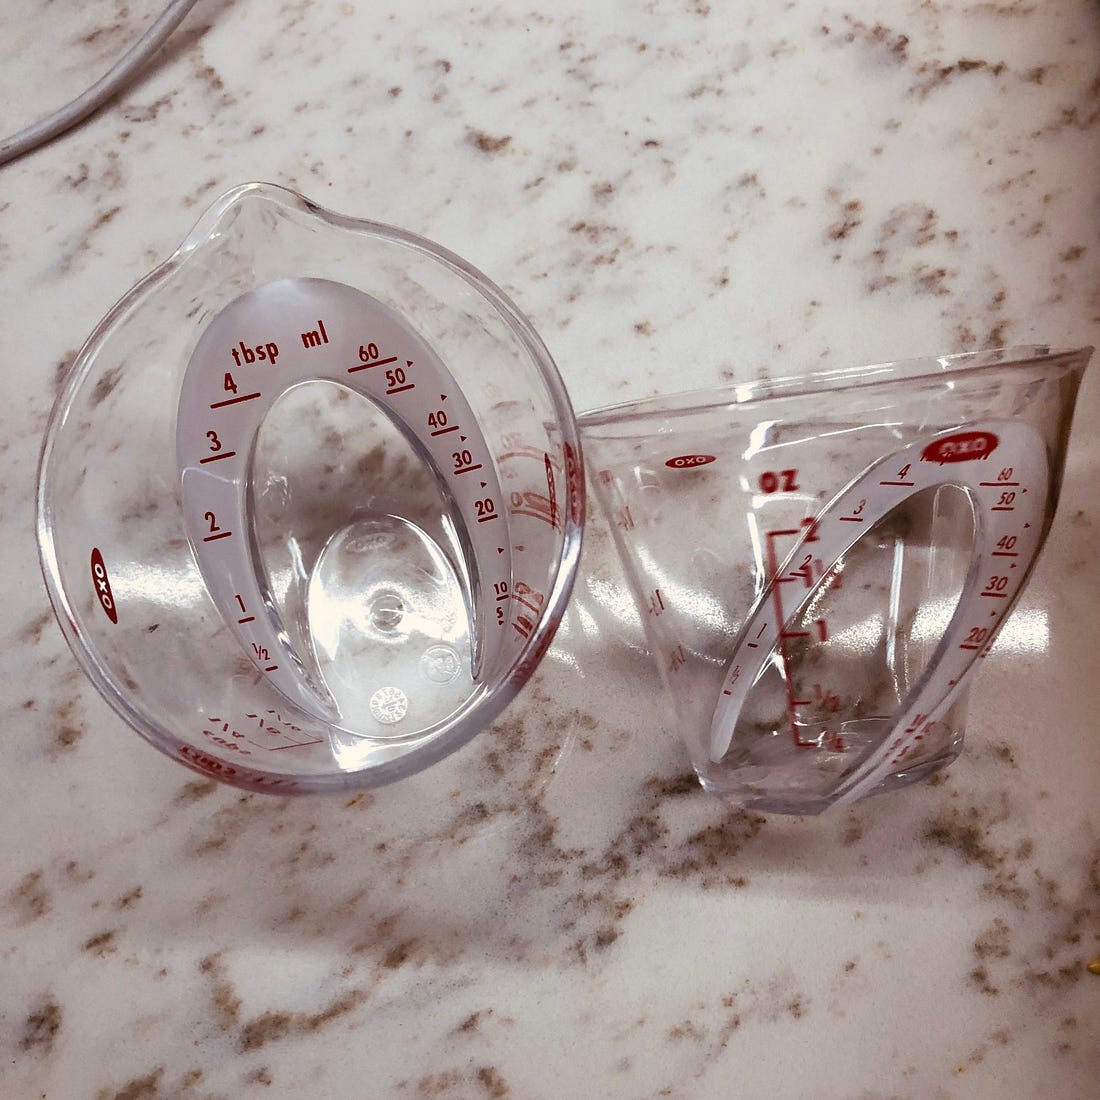 Two mini-measuring cups, with markings for several different units of measure